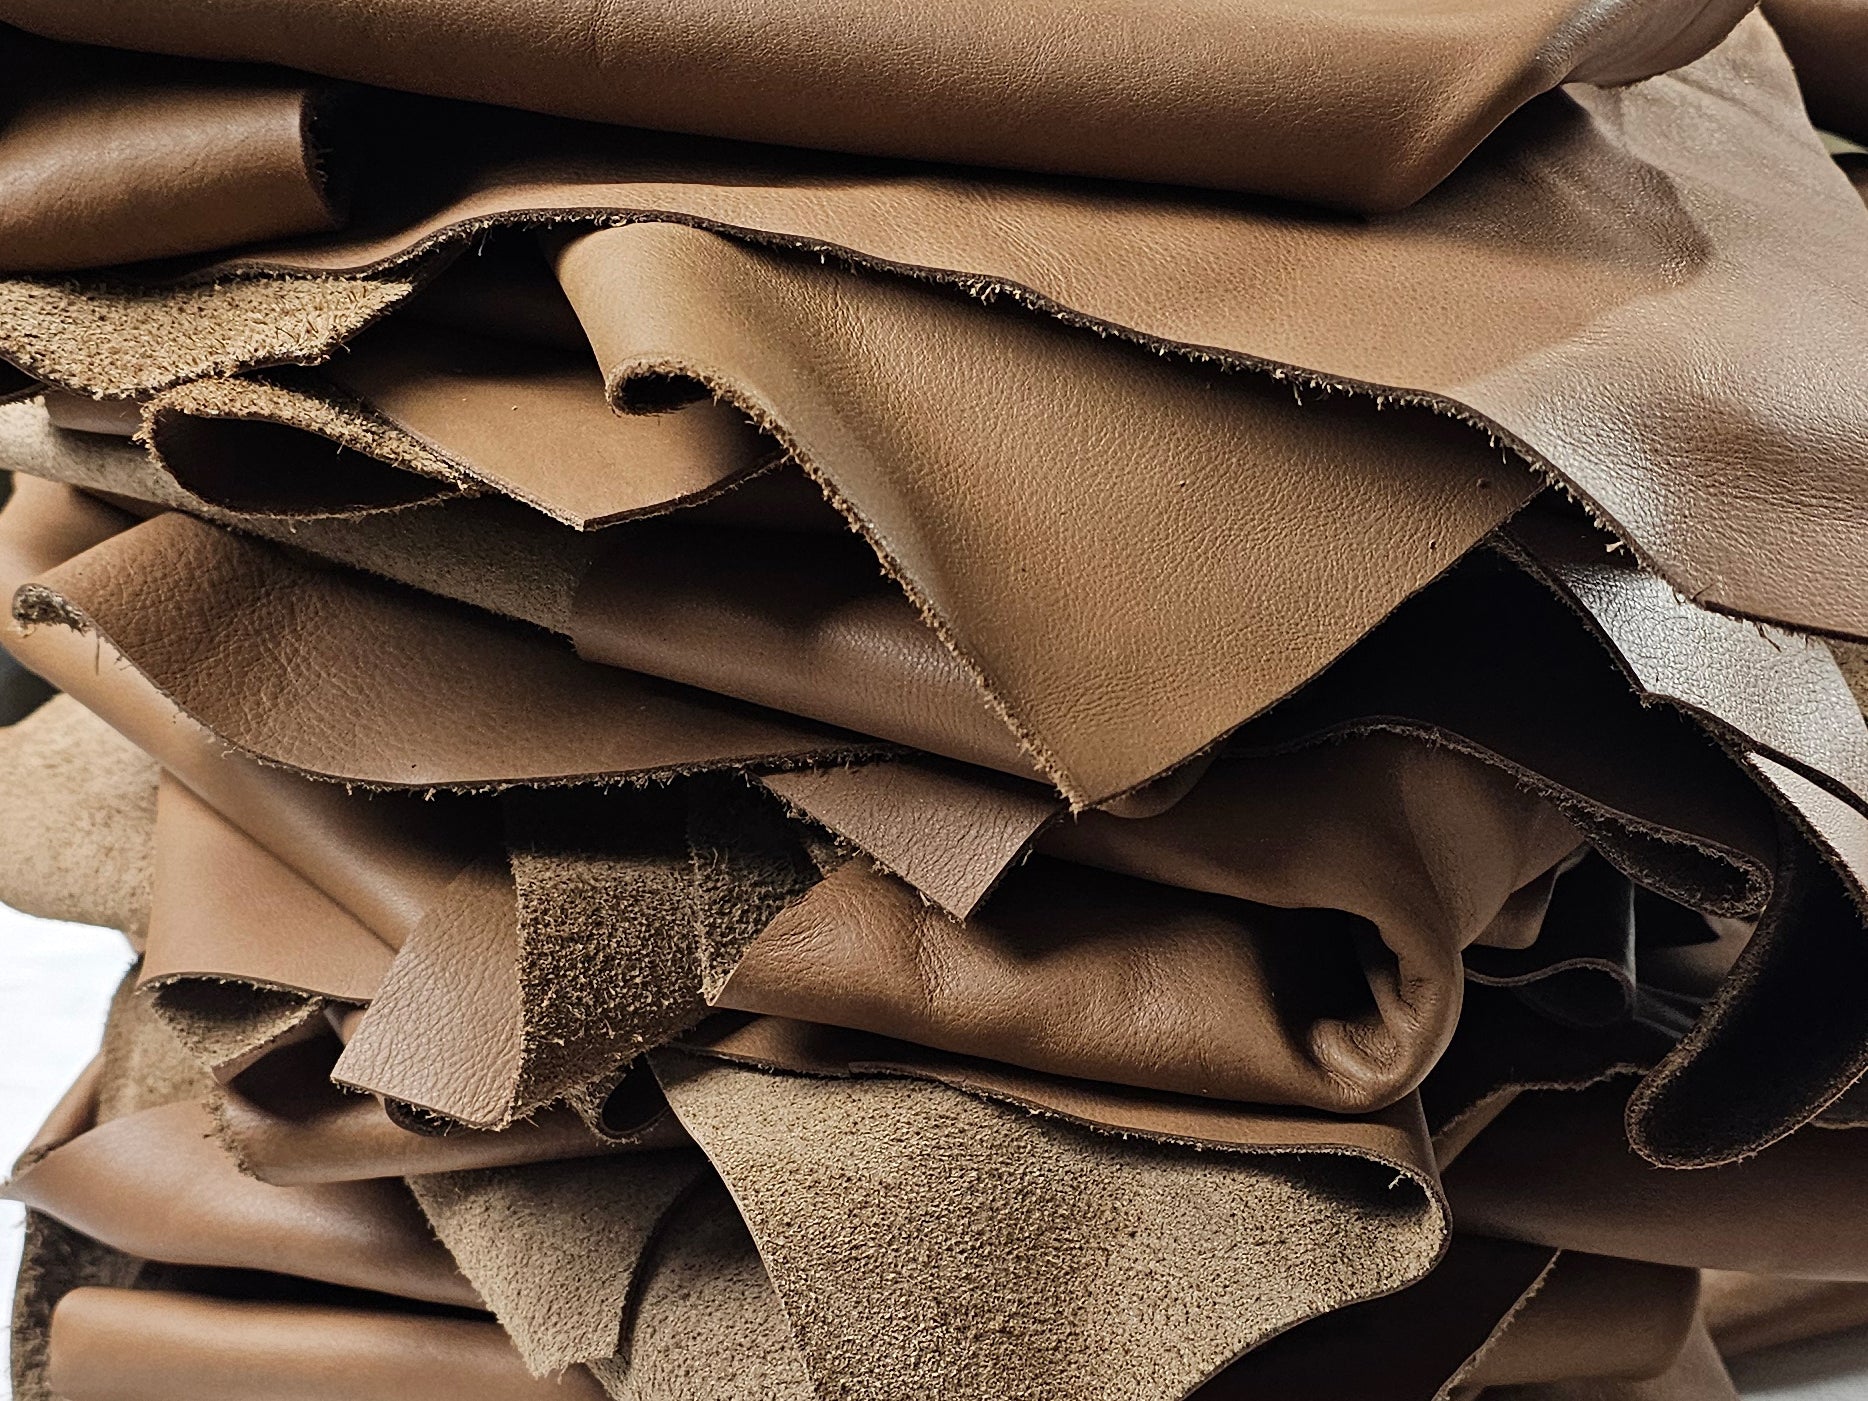 Light Brown leather scraps for crafts 1 - 2 sq ft